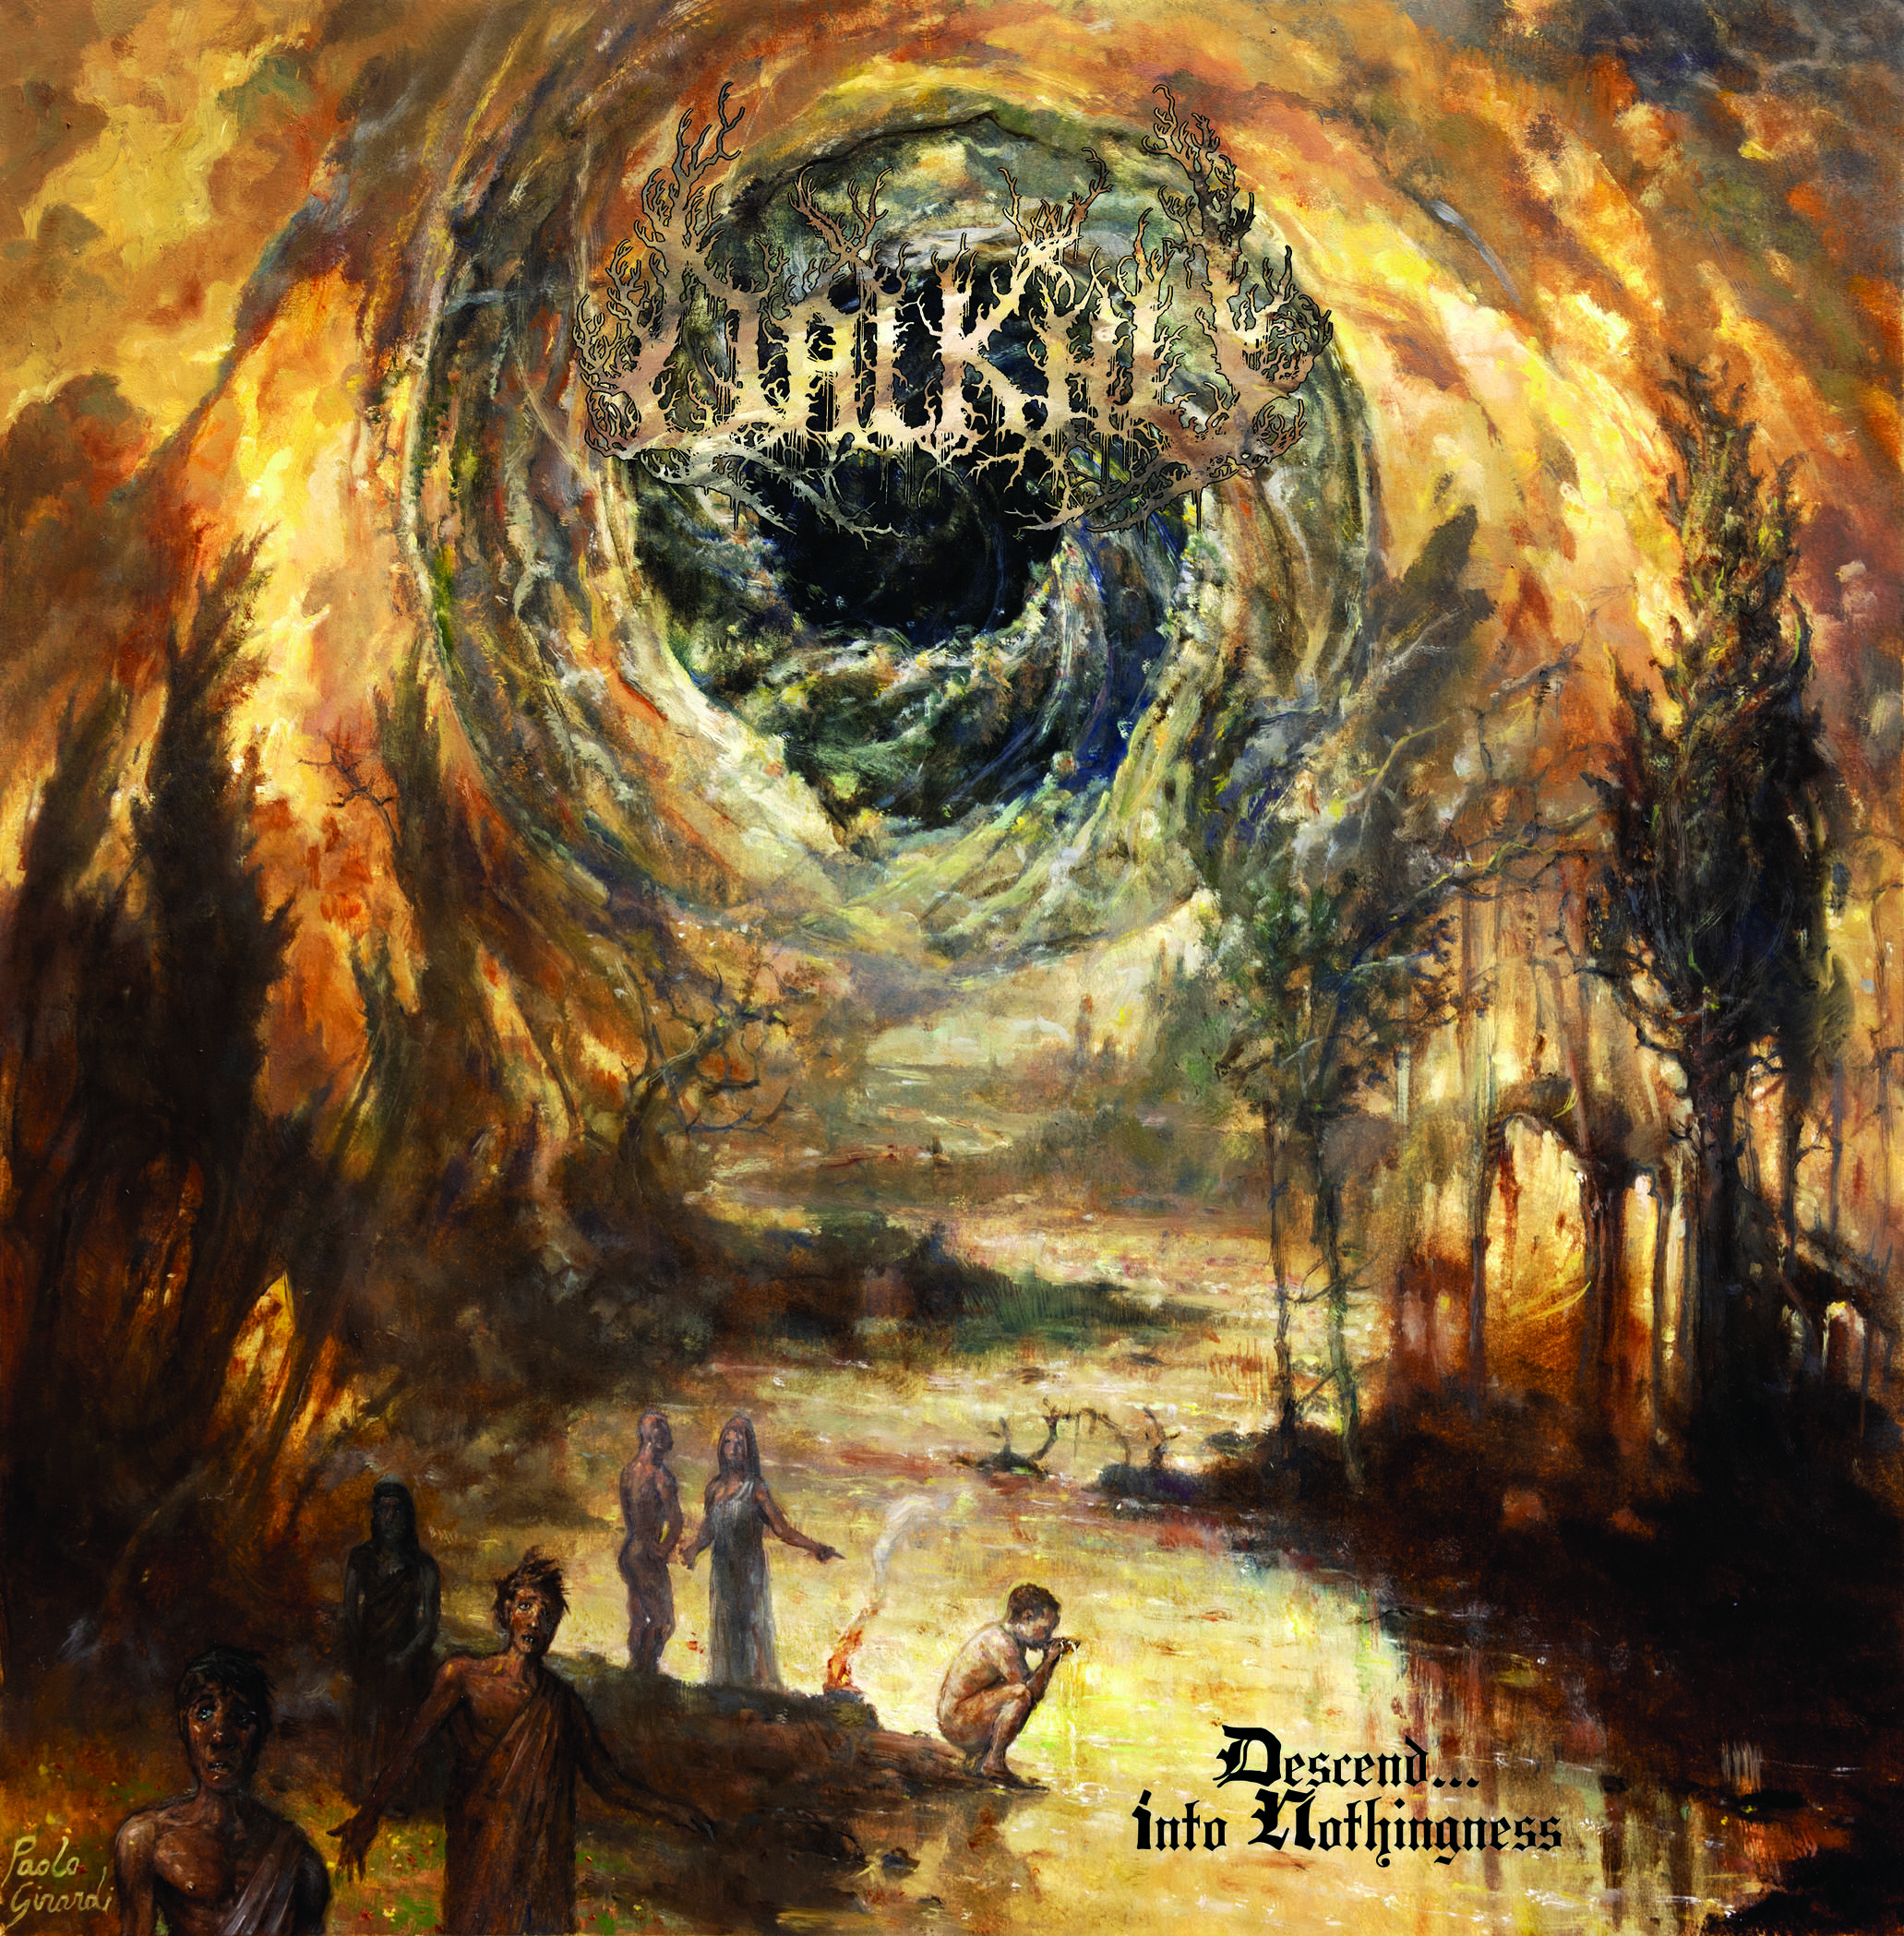 Dalkhu – Descend… into Nothingness Review